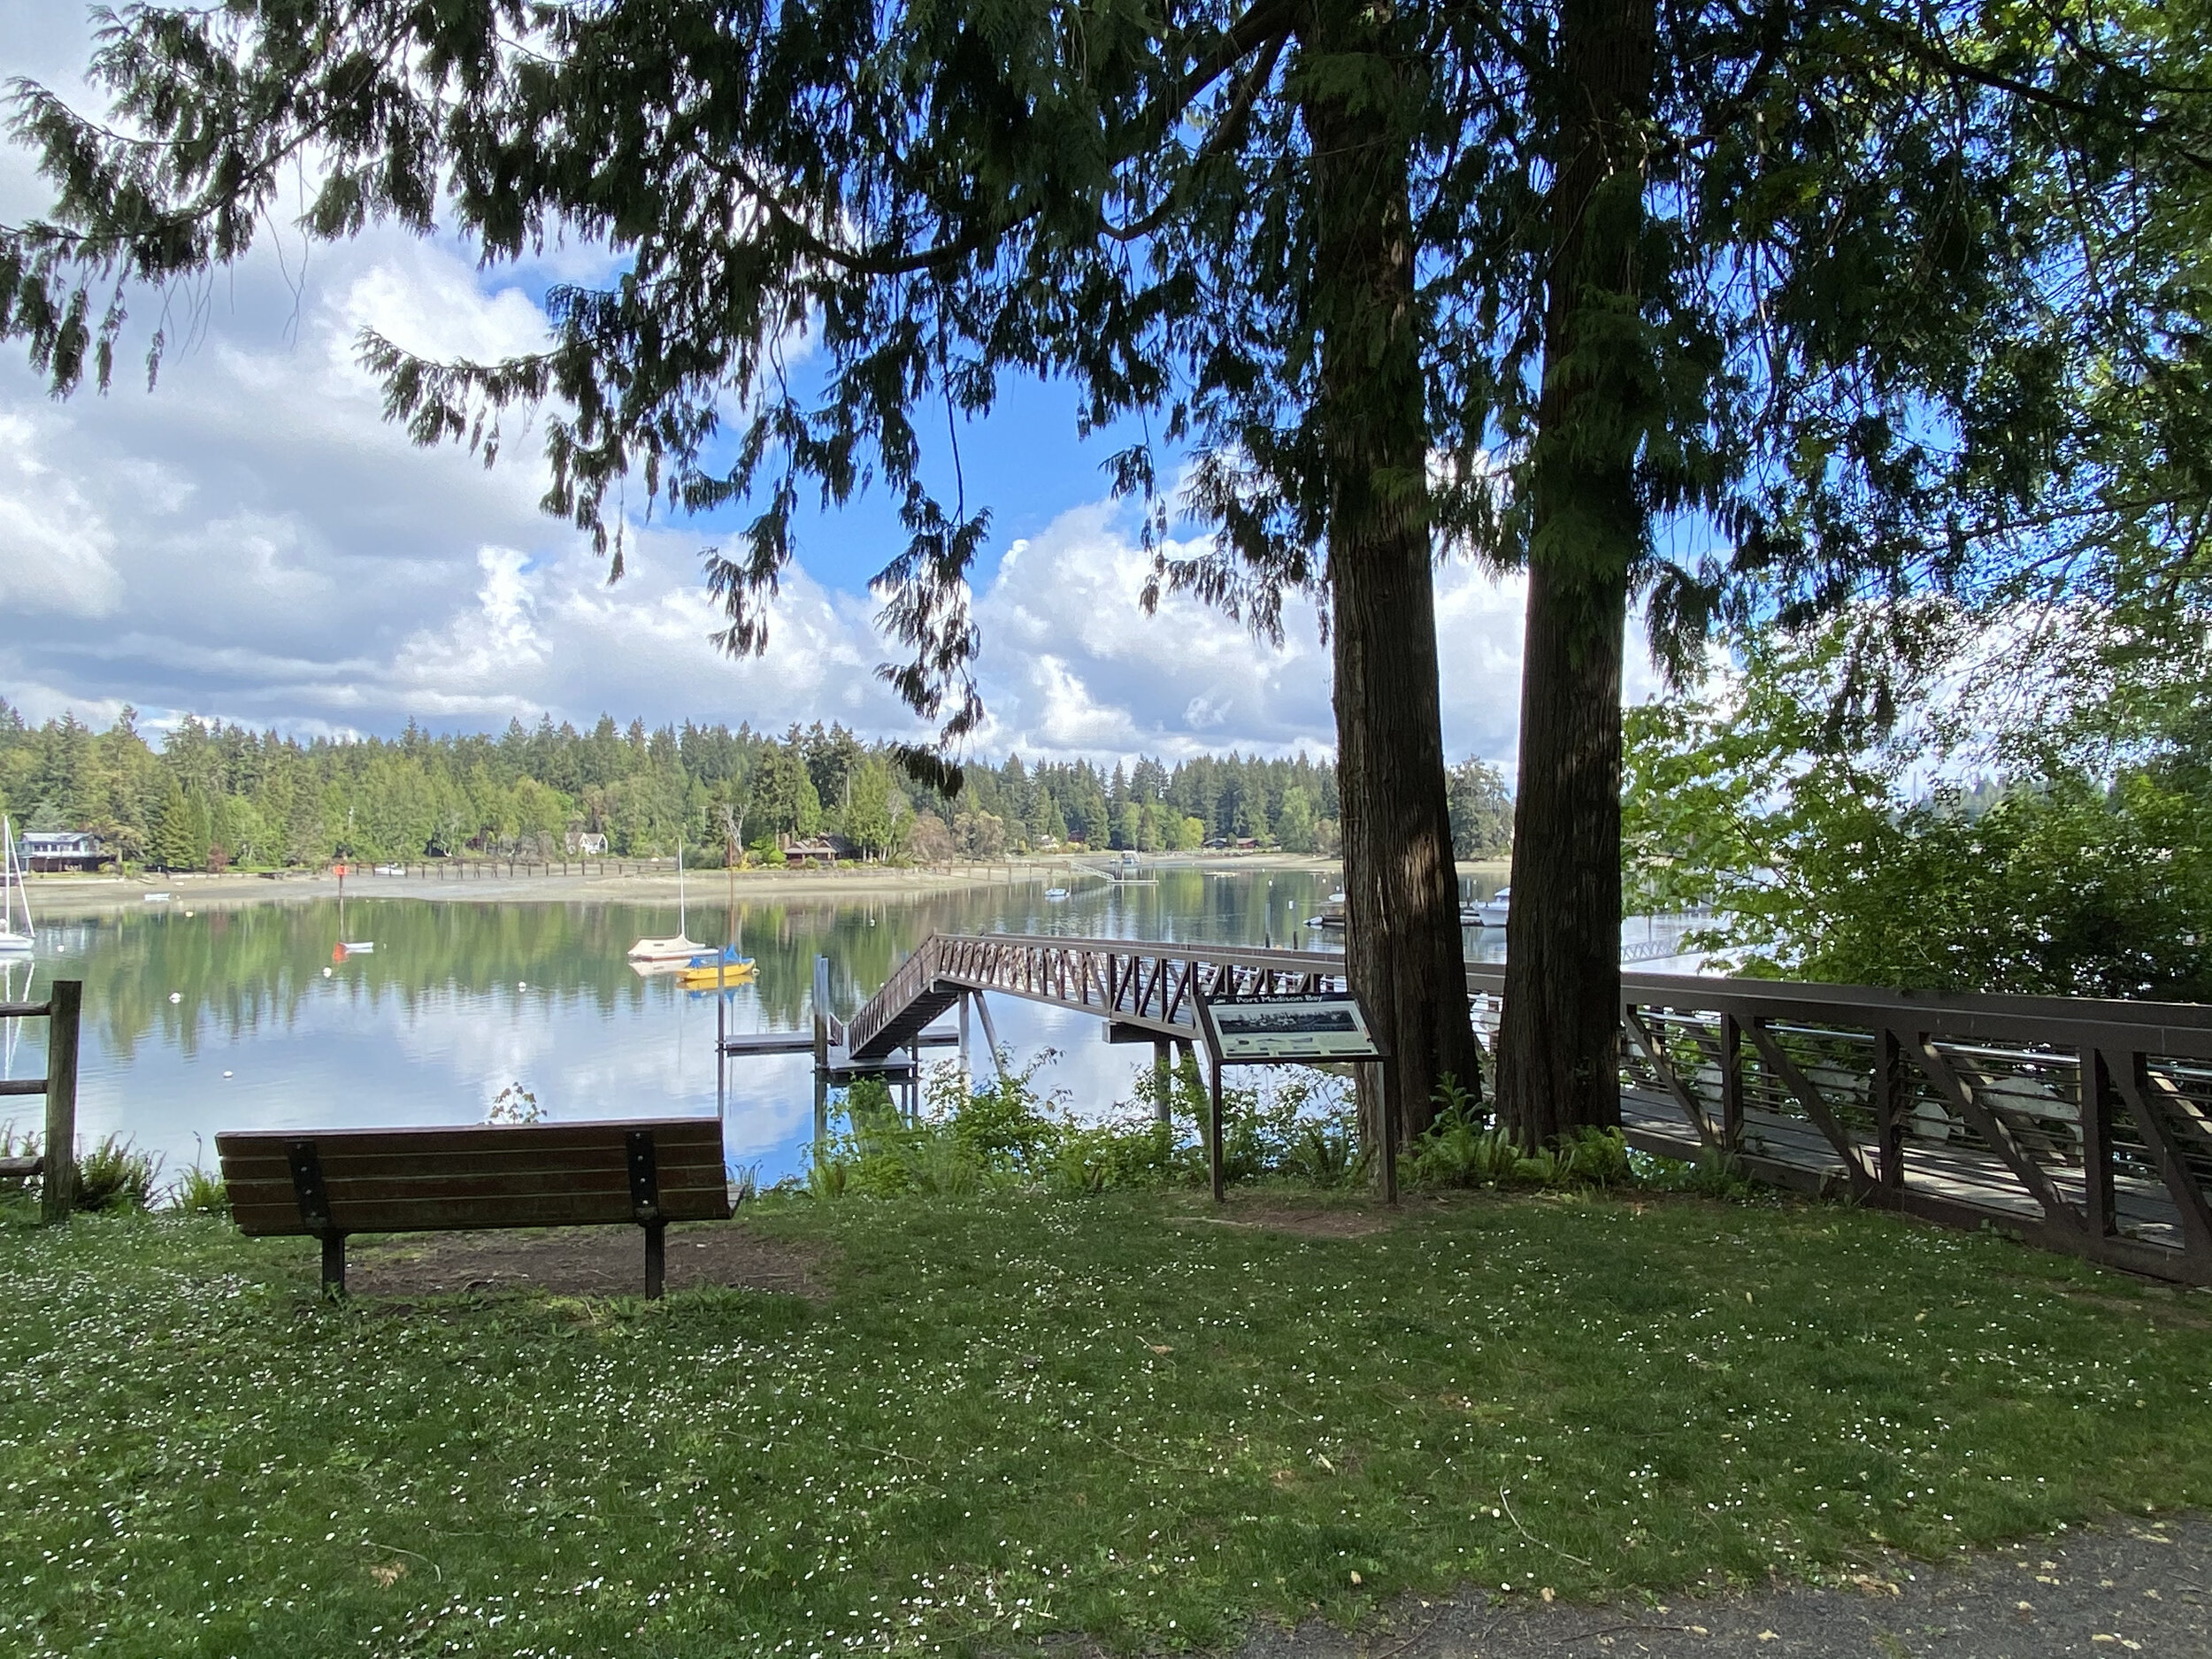  Hidden Cove Park is walking distance from the home via wonderfully maintained wooded trails. The park features a 220-foot-dock with low platform perfect for swimming, kayaking and SUPing. Or just rest and enjoy the view or have a picnic in the lawn.